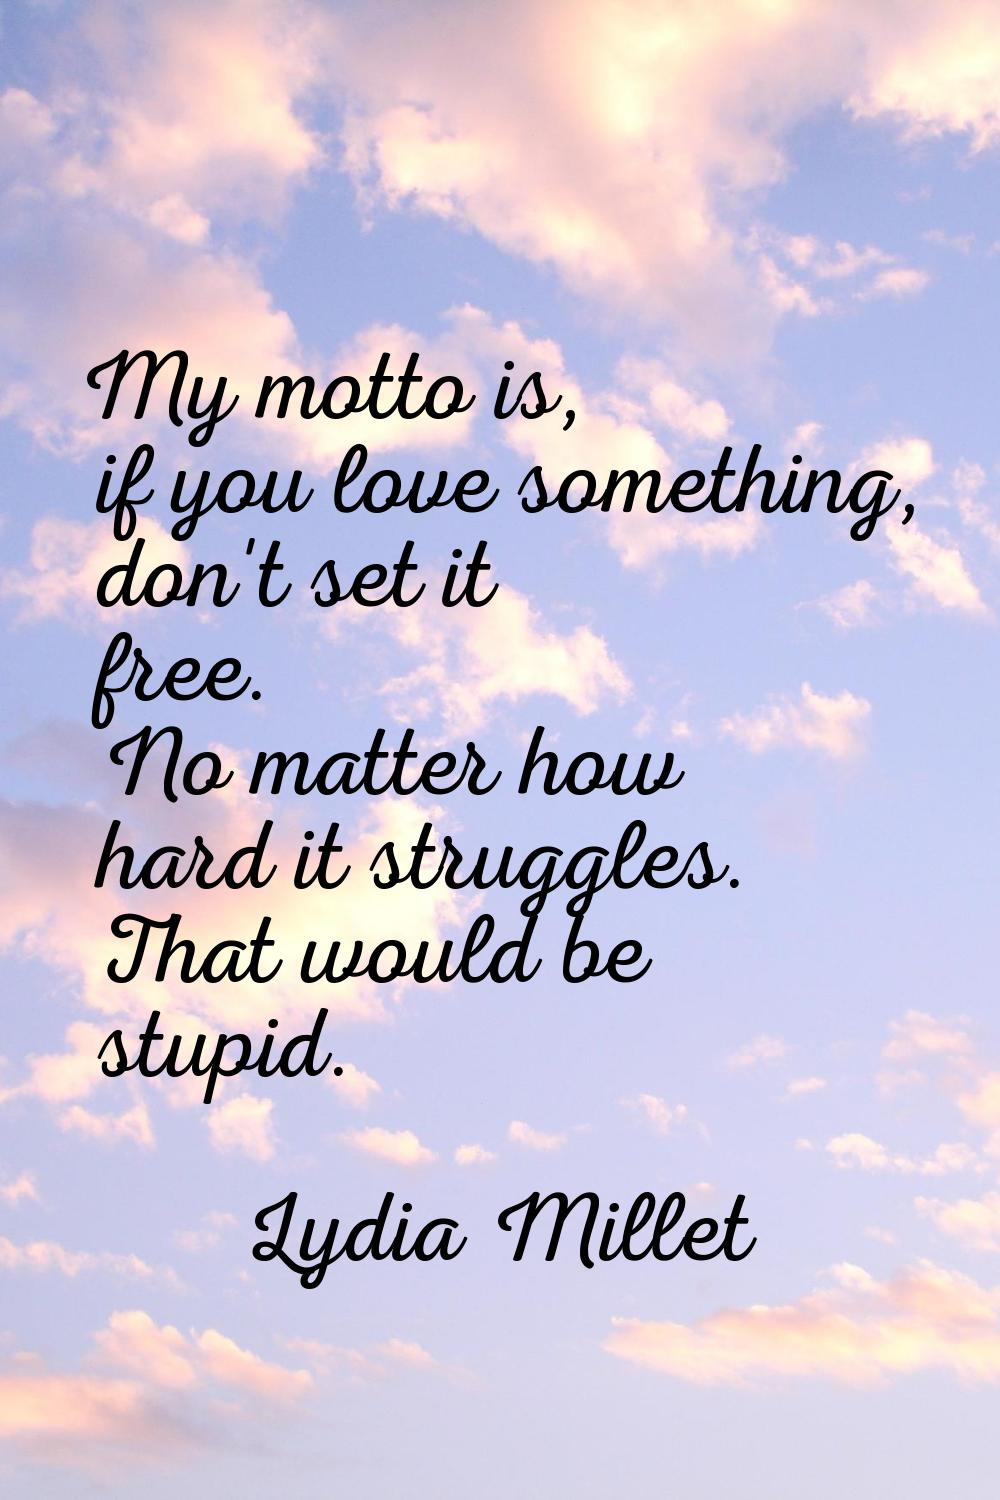 My motto is, if you love something, don't set it free. No matter how hard it struggles. That would 